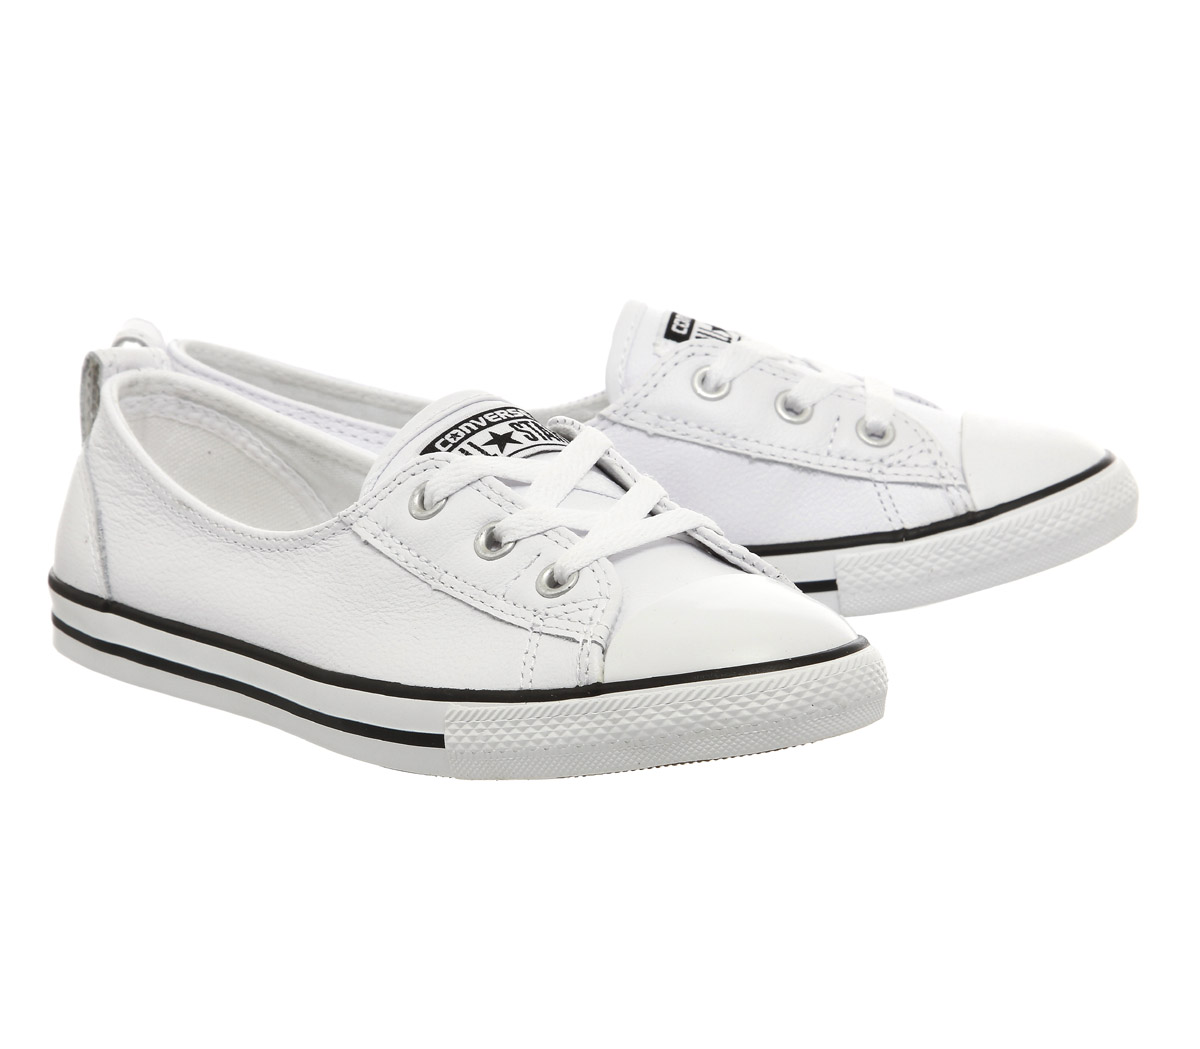 Converse Ctas Ballet Lace Leather White Black - Hers trainers